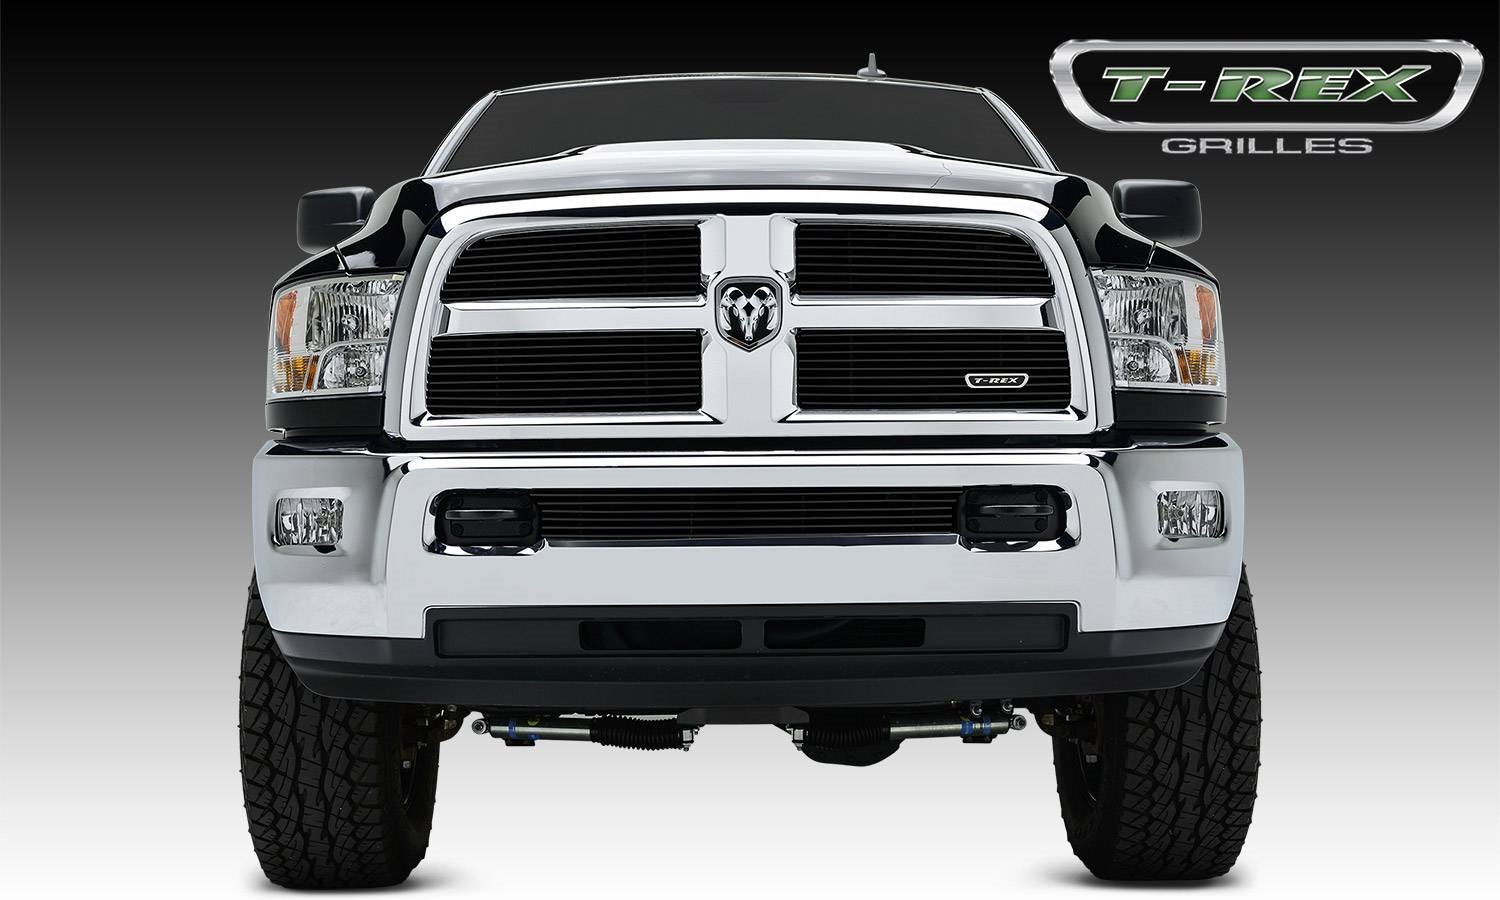 Billet Grille Main Replacement 4 Pc s Black Aluminum Bars Requires replacement of inside chrome